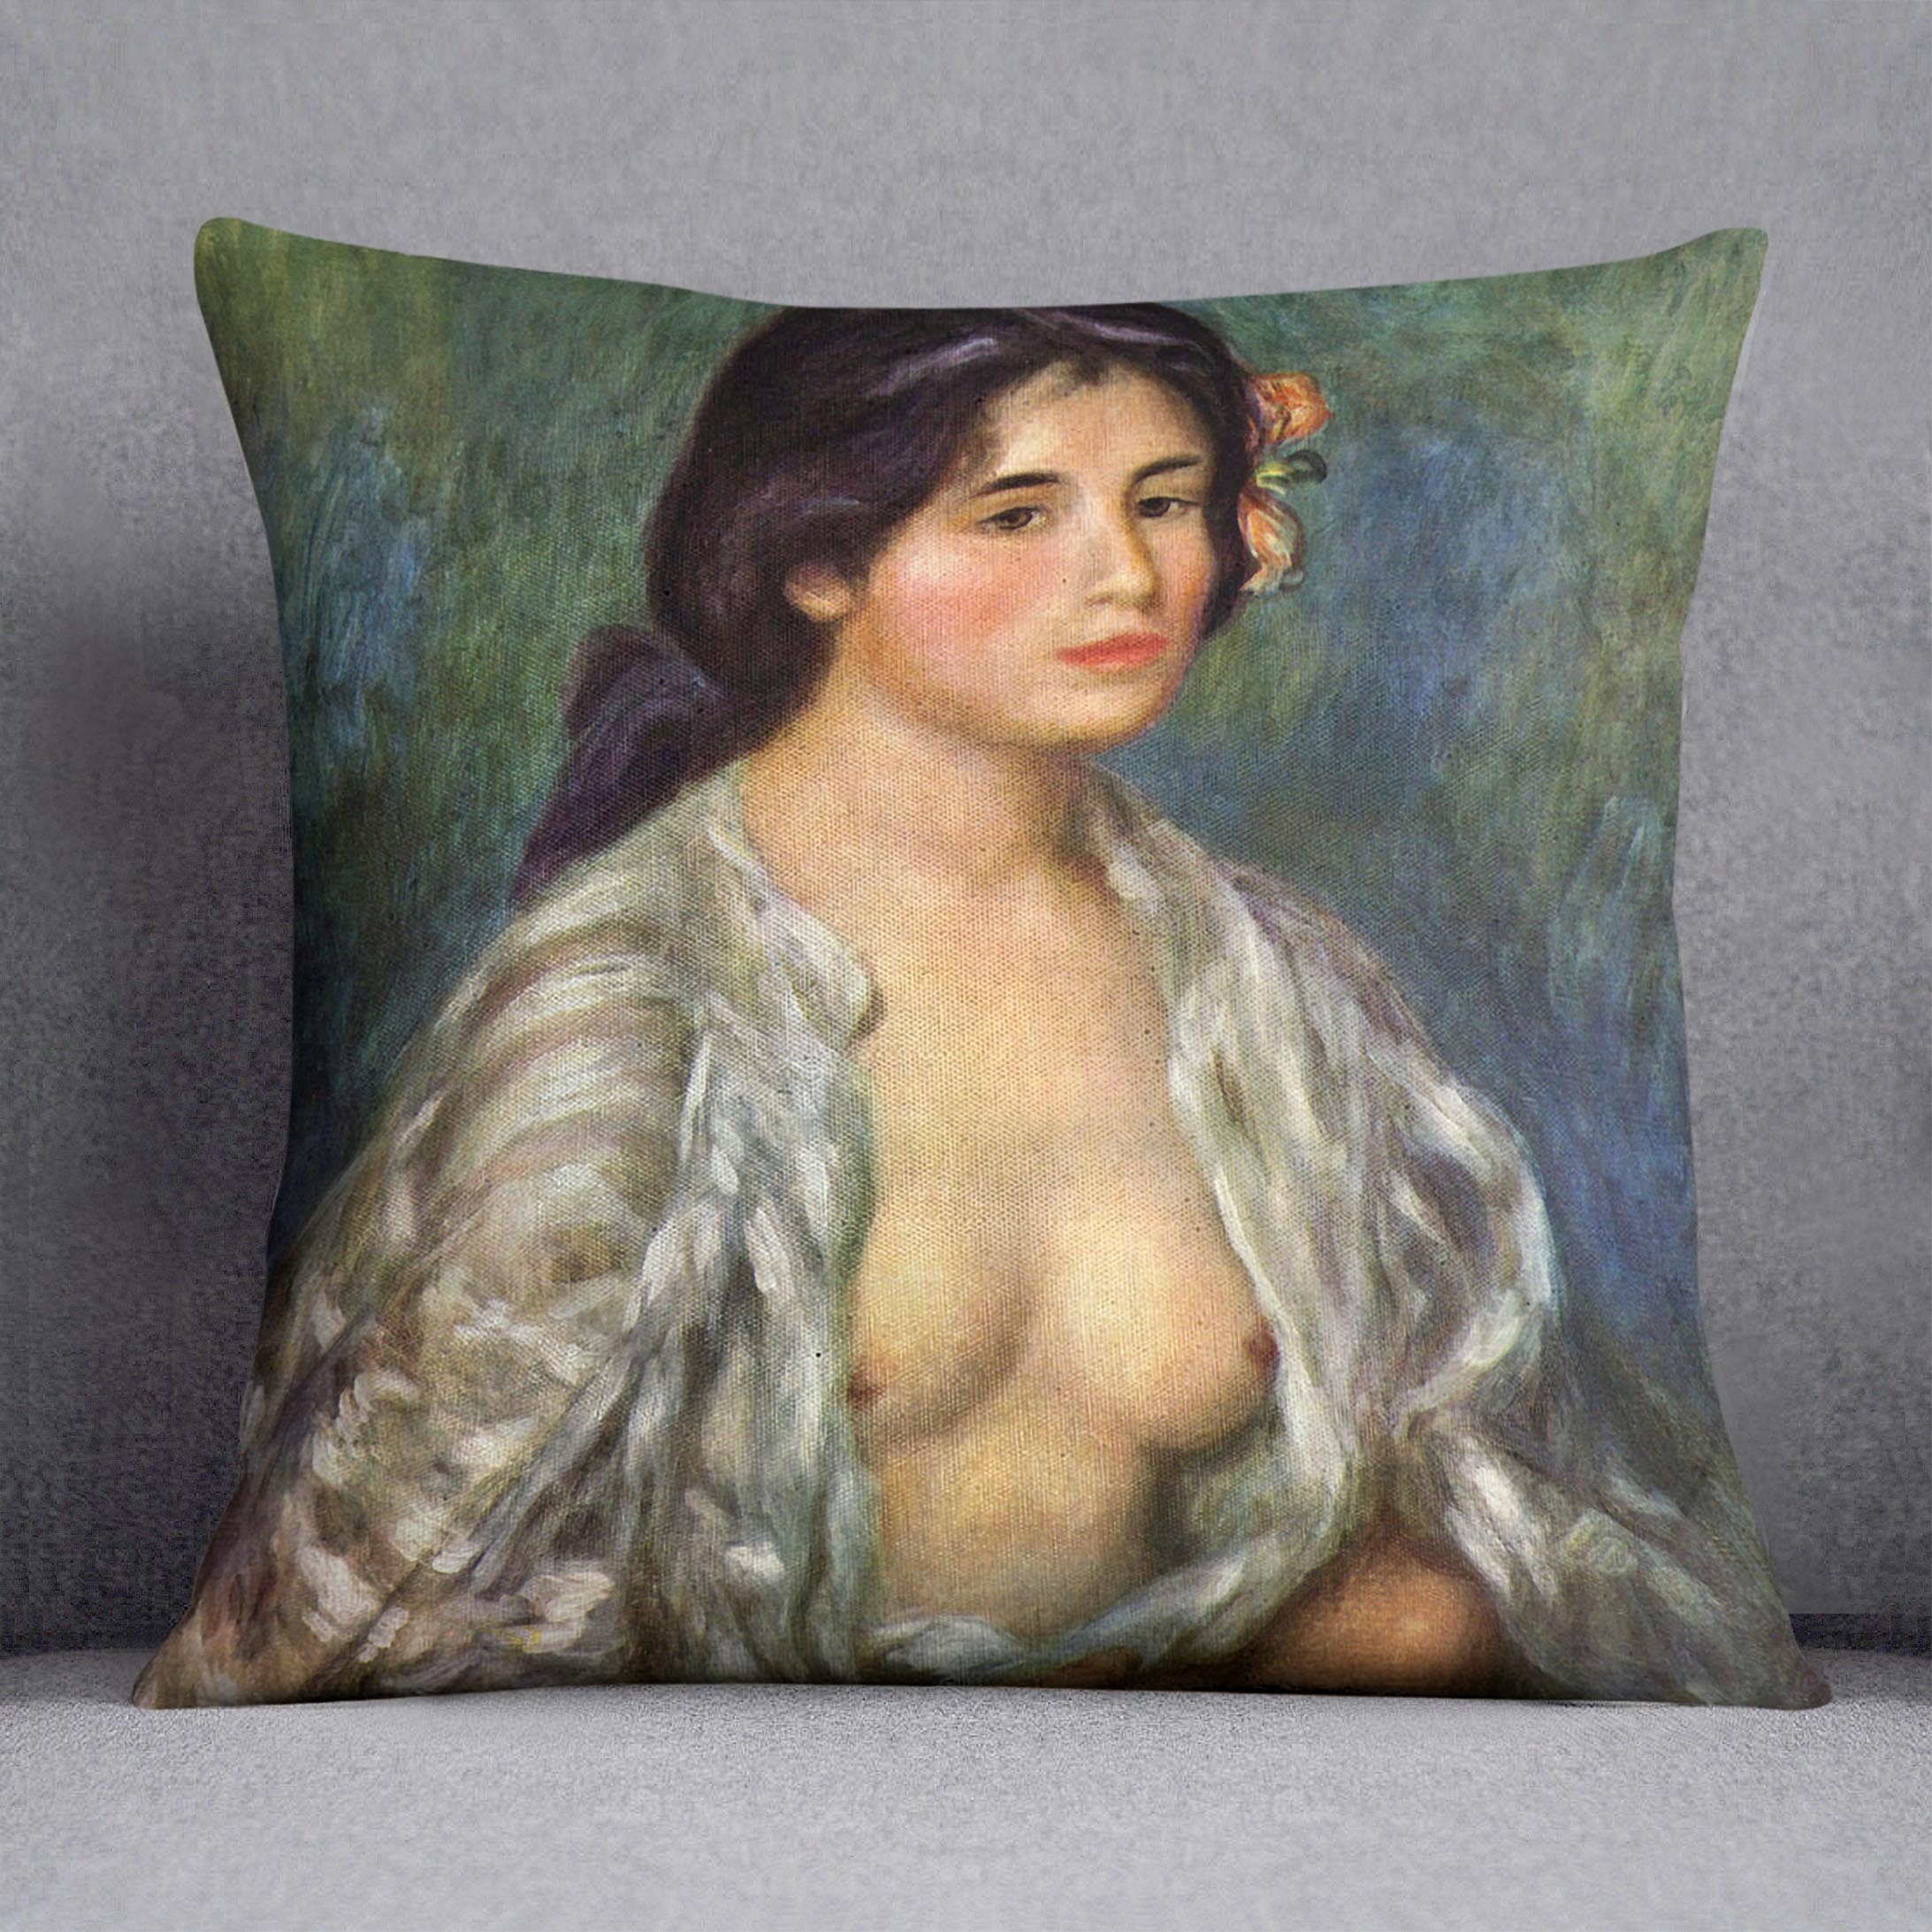 Gabrielle with open blouse by Renoir Cushion